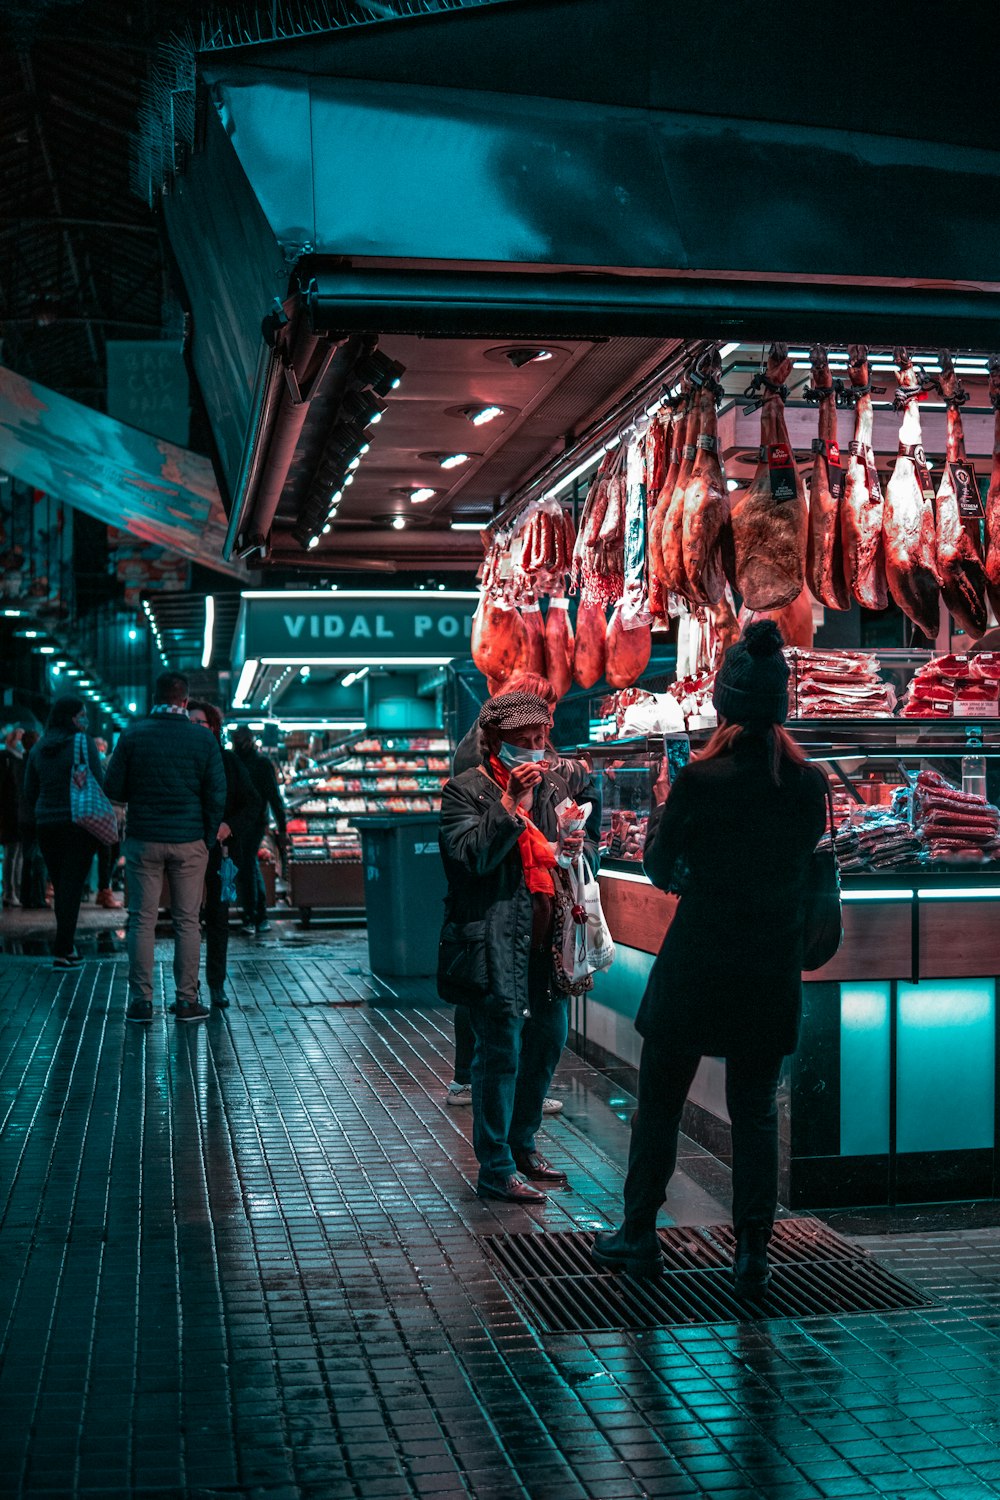 a group of people standing in front of a meat stand